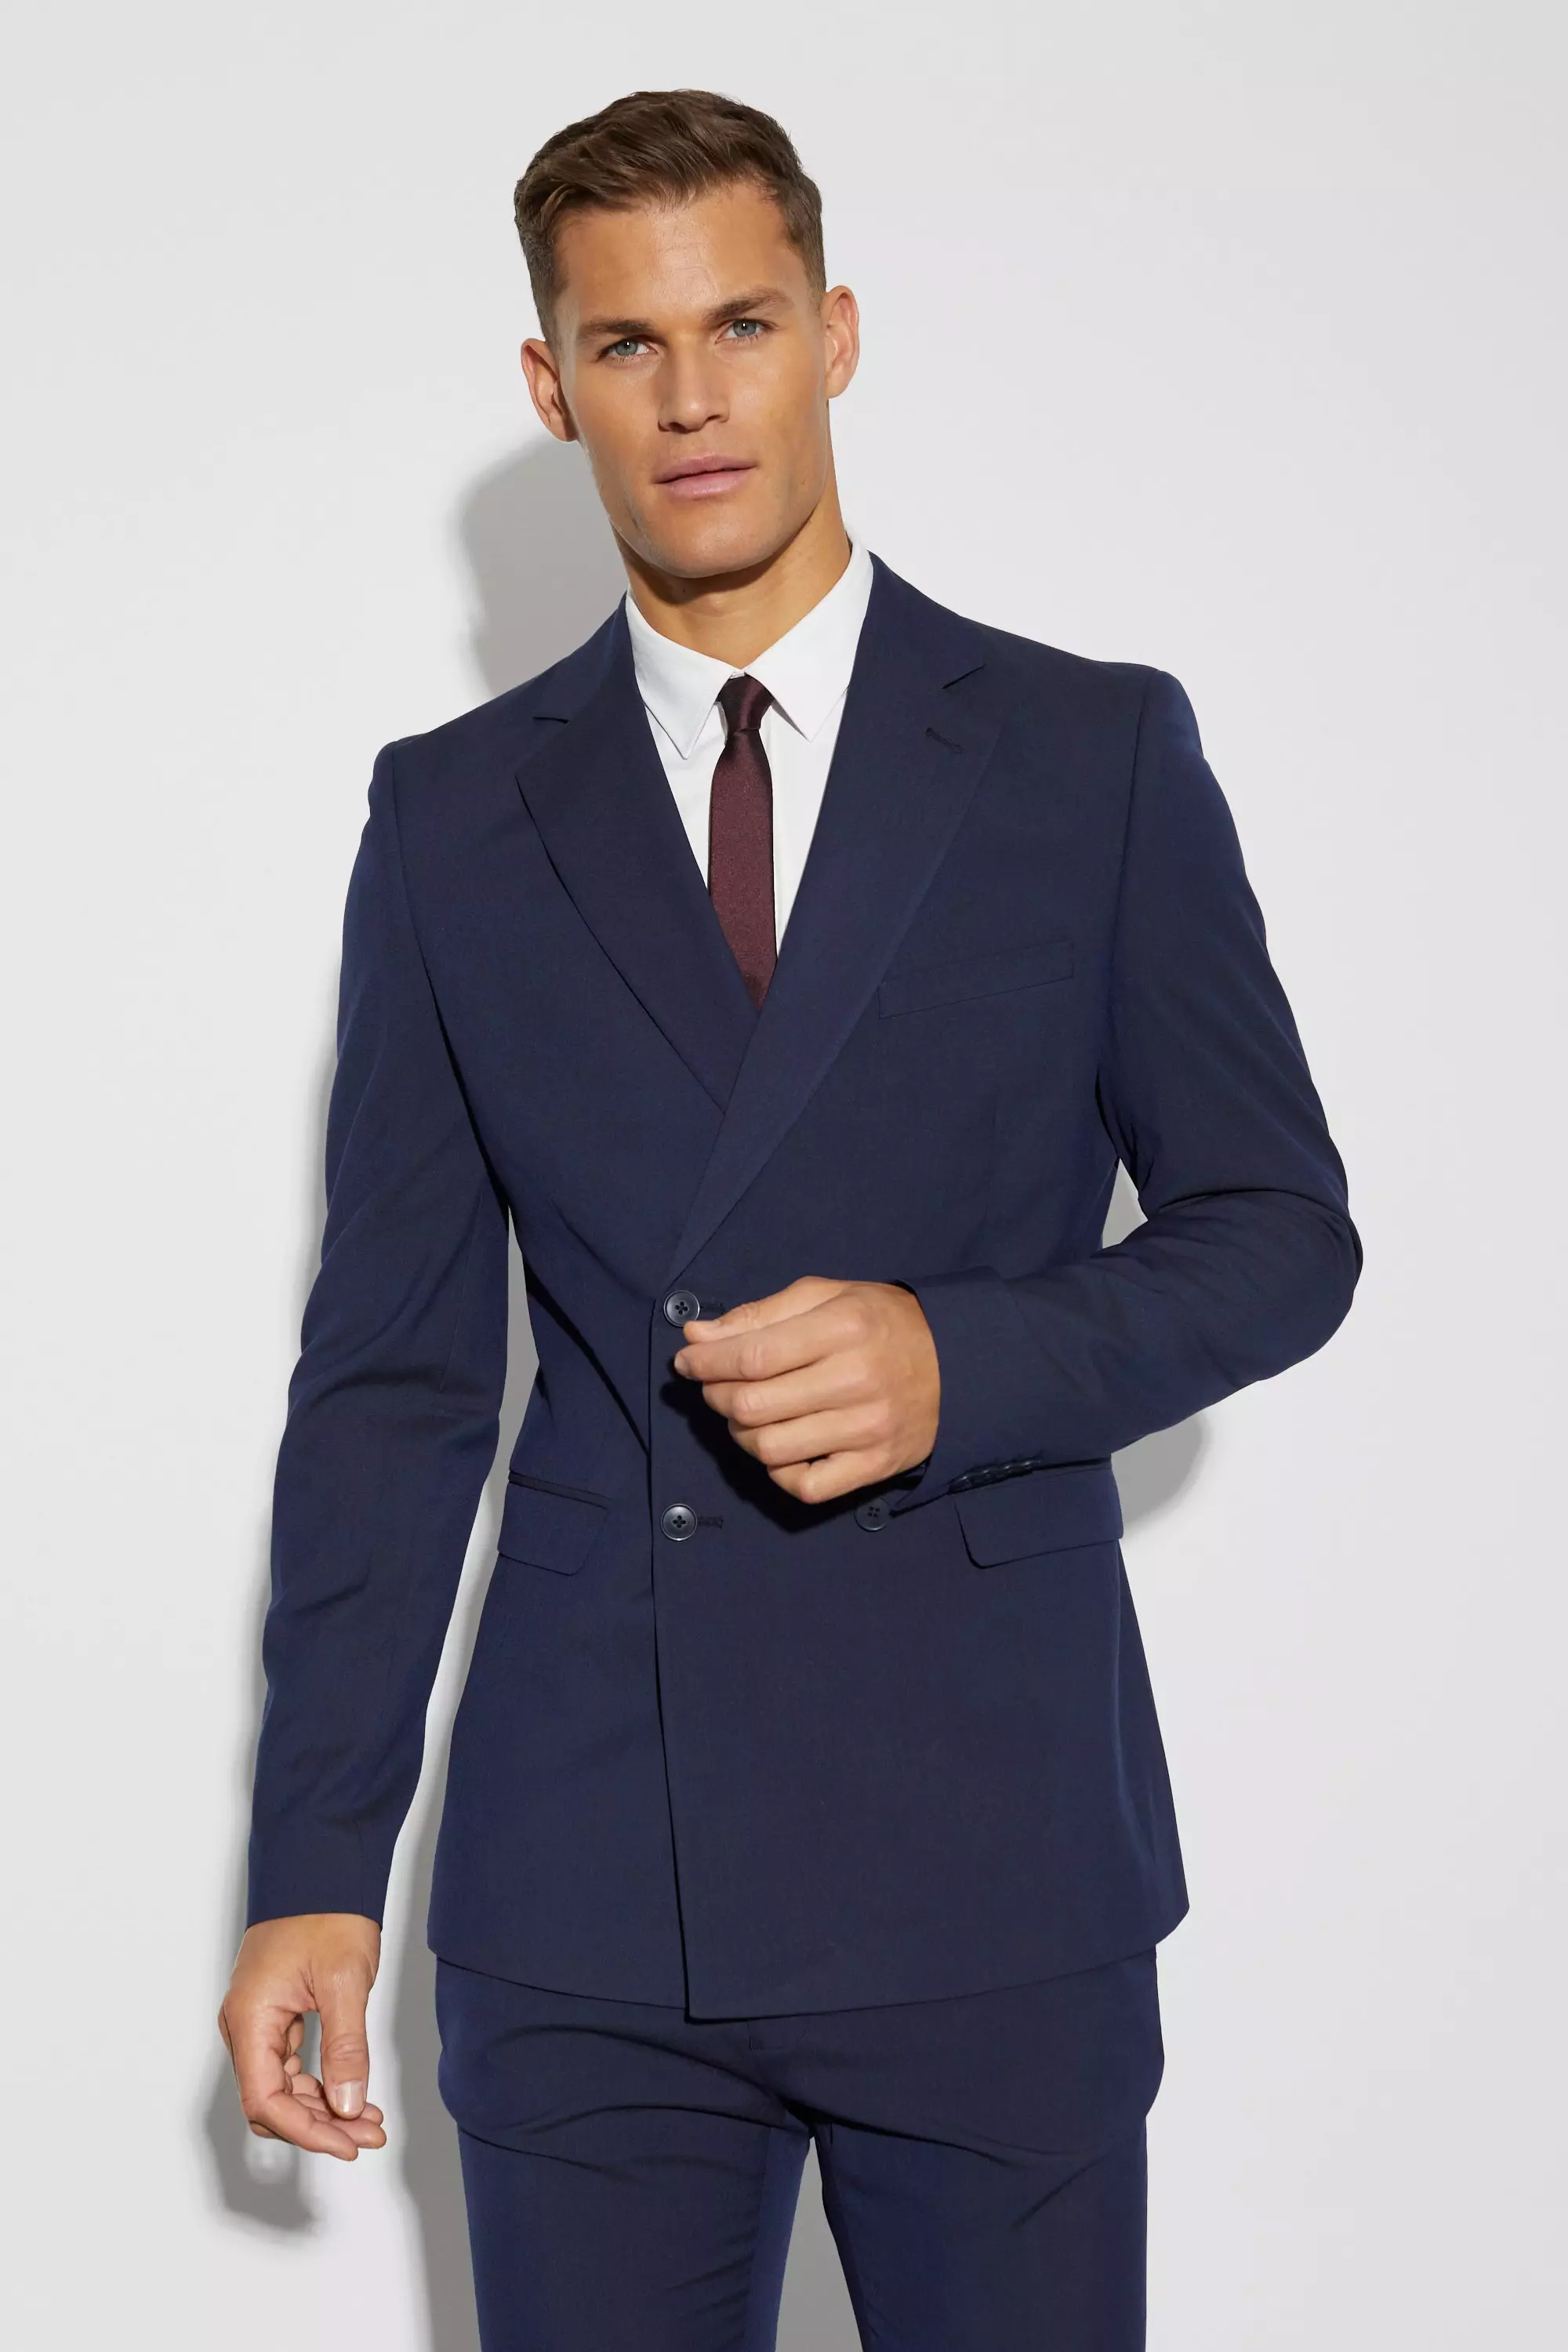 Tall Skinny Double Breasted Suit Jacket Navy